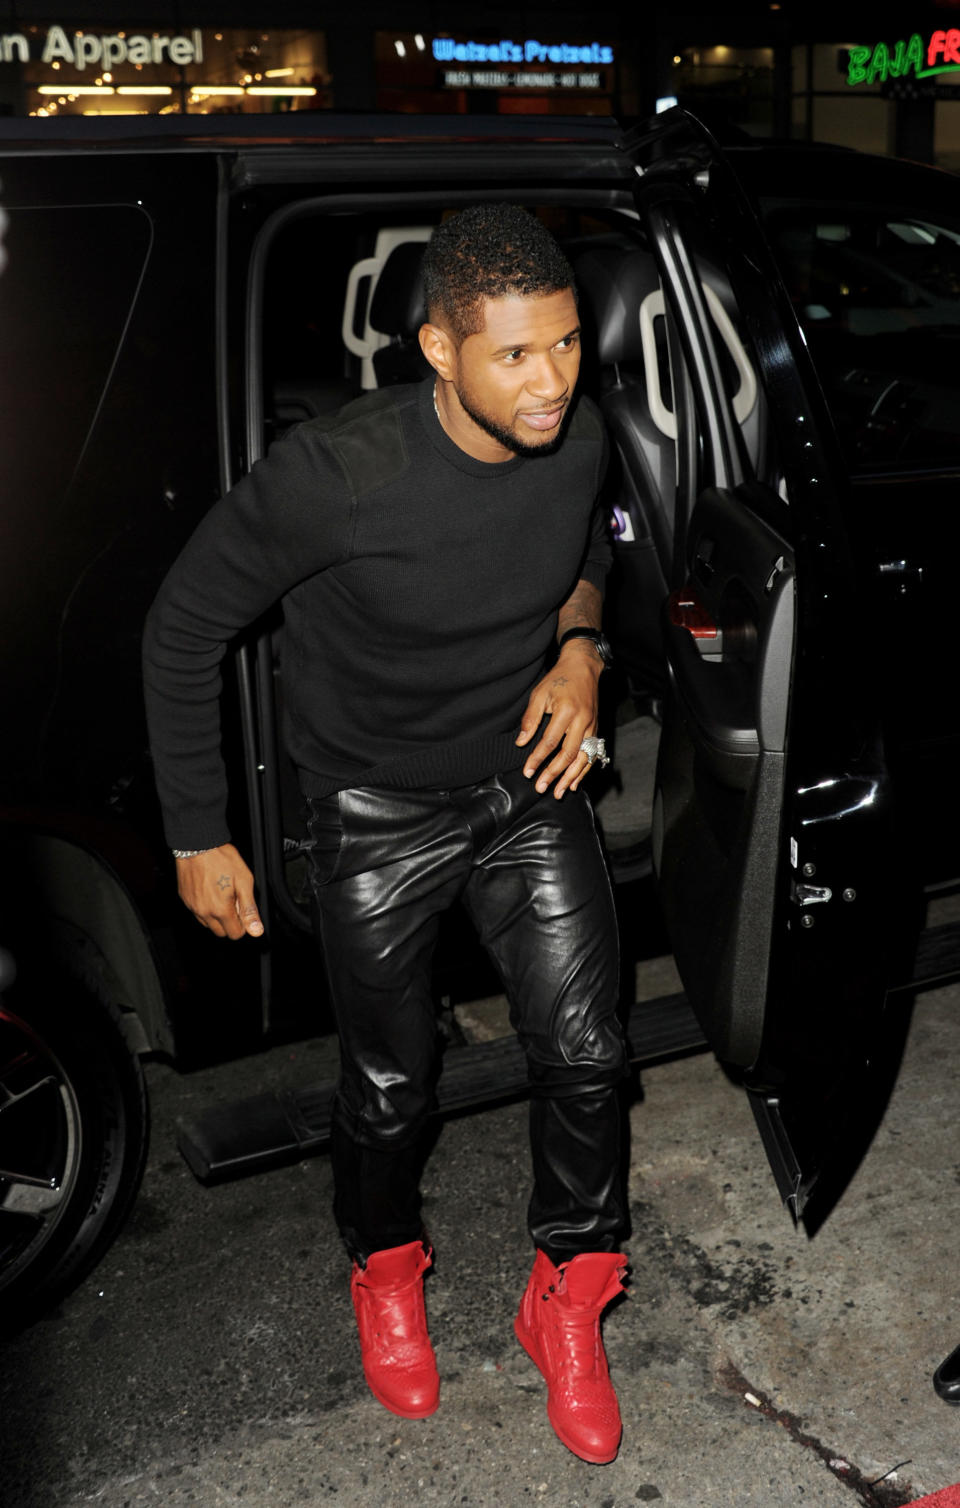 LOS ANGELES, CA - MARCH 20:  Singer Usher arrives at a screening of NBC's 'The Voice' Season 4 at the Chinese Theatre on March 20, 2013 in Los Angeles, California.  (Photo by Kevin Winter/Getty Images)